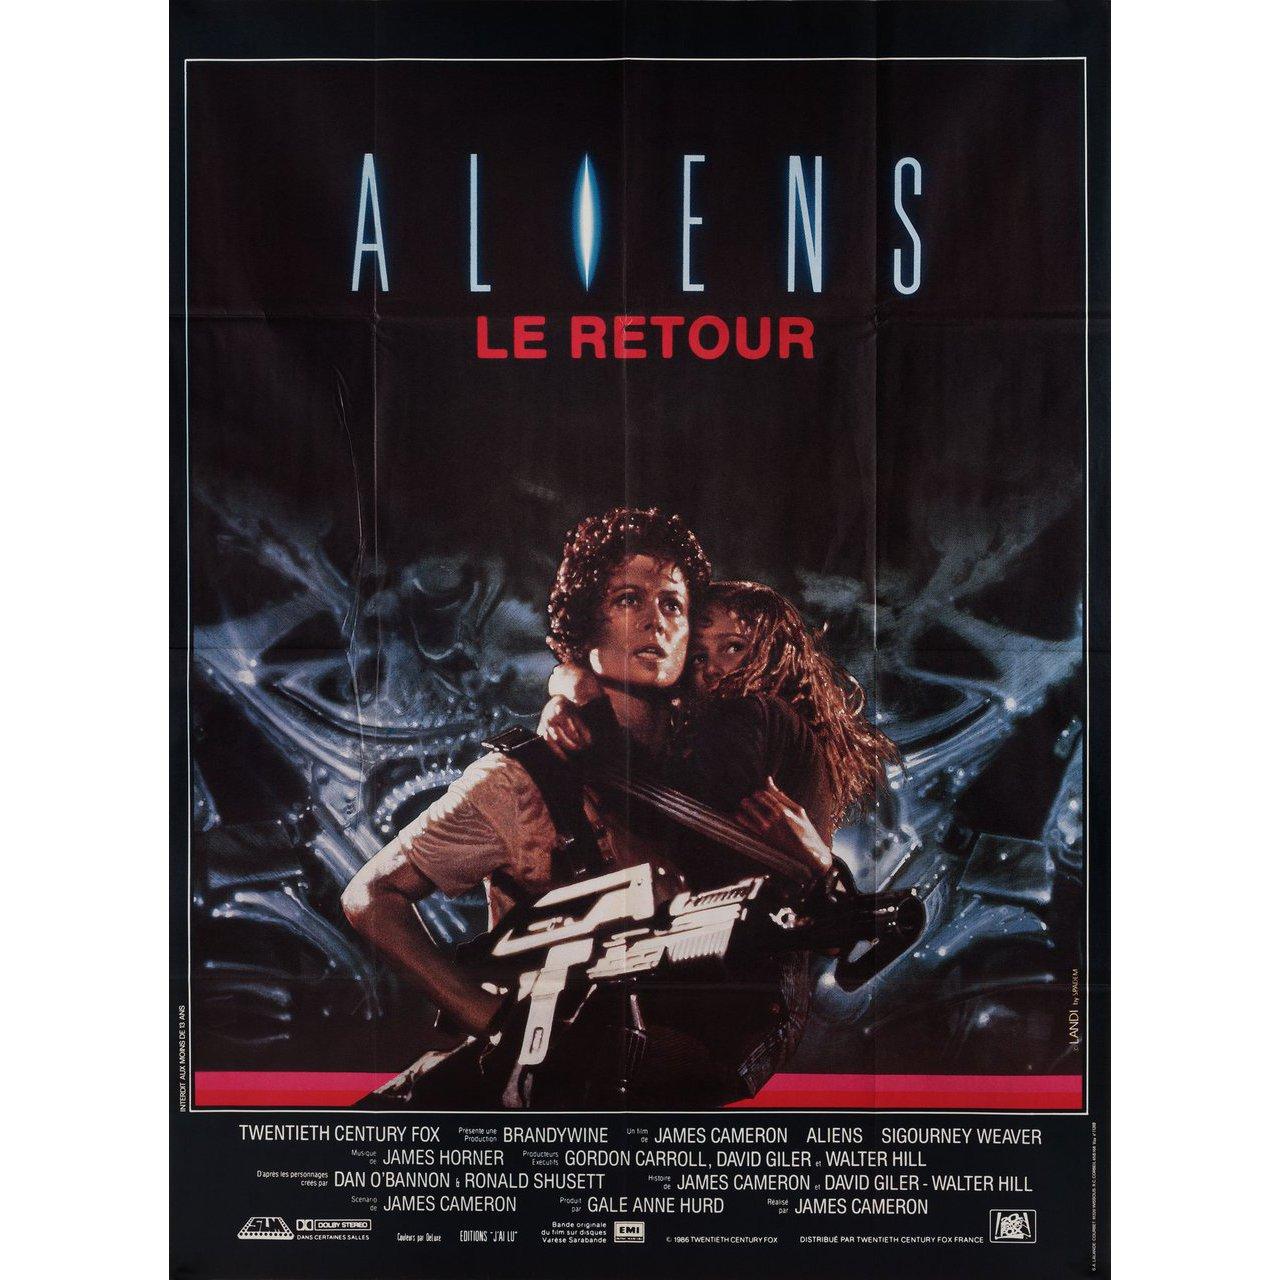 Original 1986 French grande poster for the film Aliens directed by James Cameron with Sigourney Weaver / Carrie Henn / Michael Biehn / Paul Reiser. Very Good-Fine condition, folded with printers creases. Many original posters were issued folded or